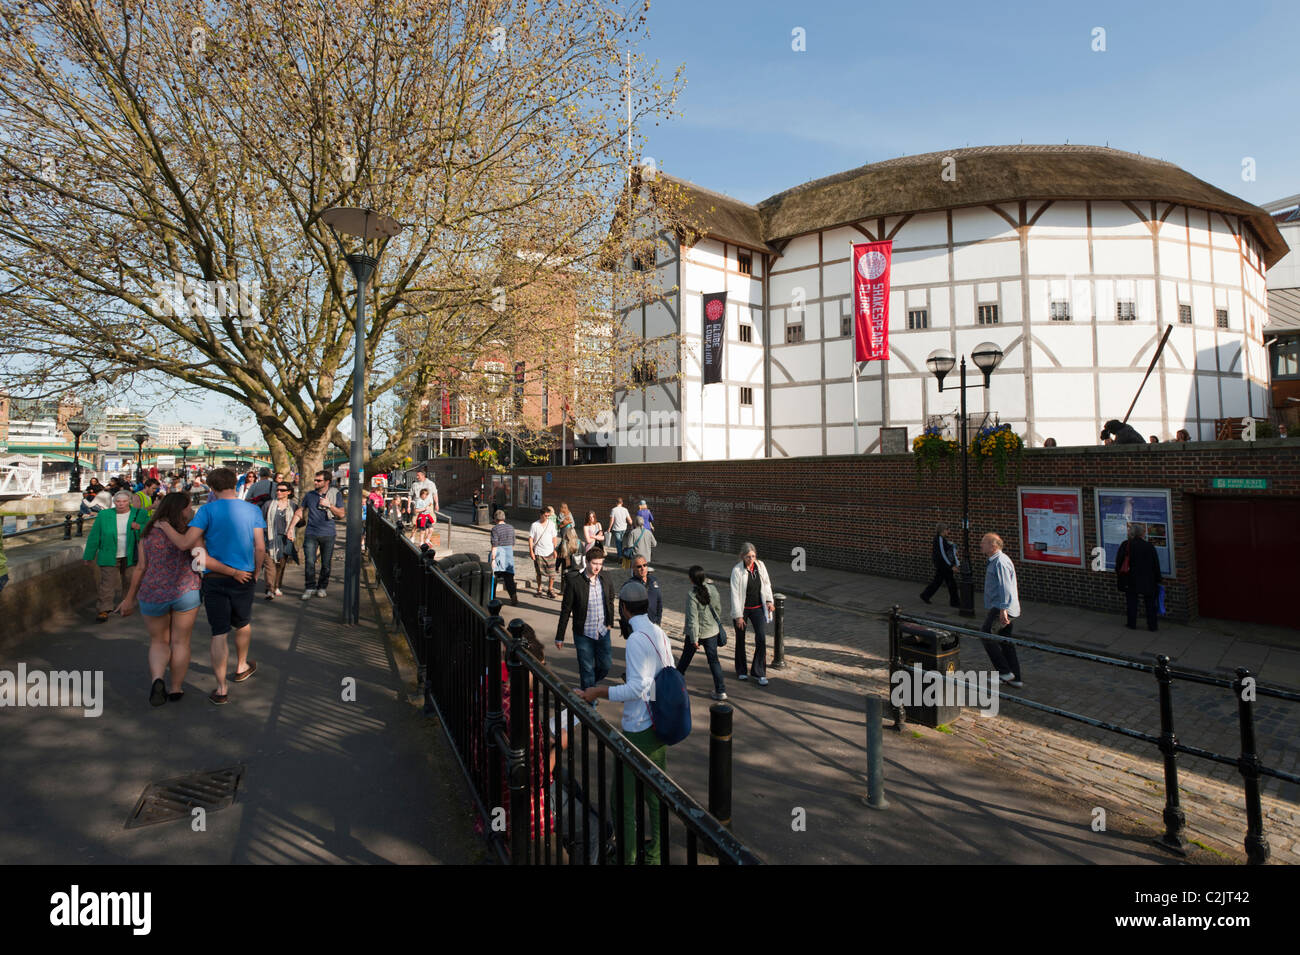 The Globe Theatre on the south bank of the River Thames (Bankside) in London, England, UK. Stock Photo